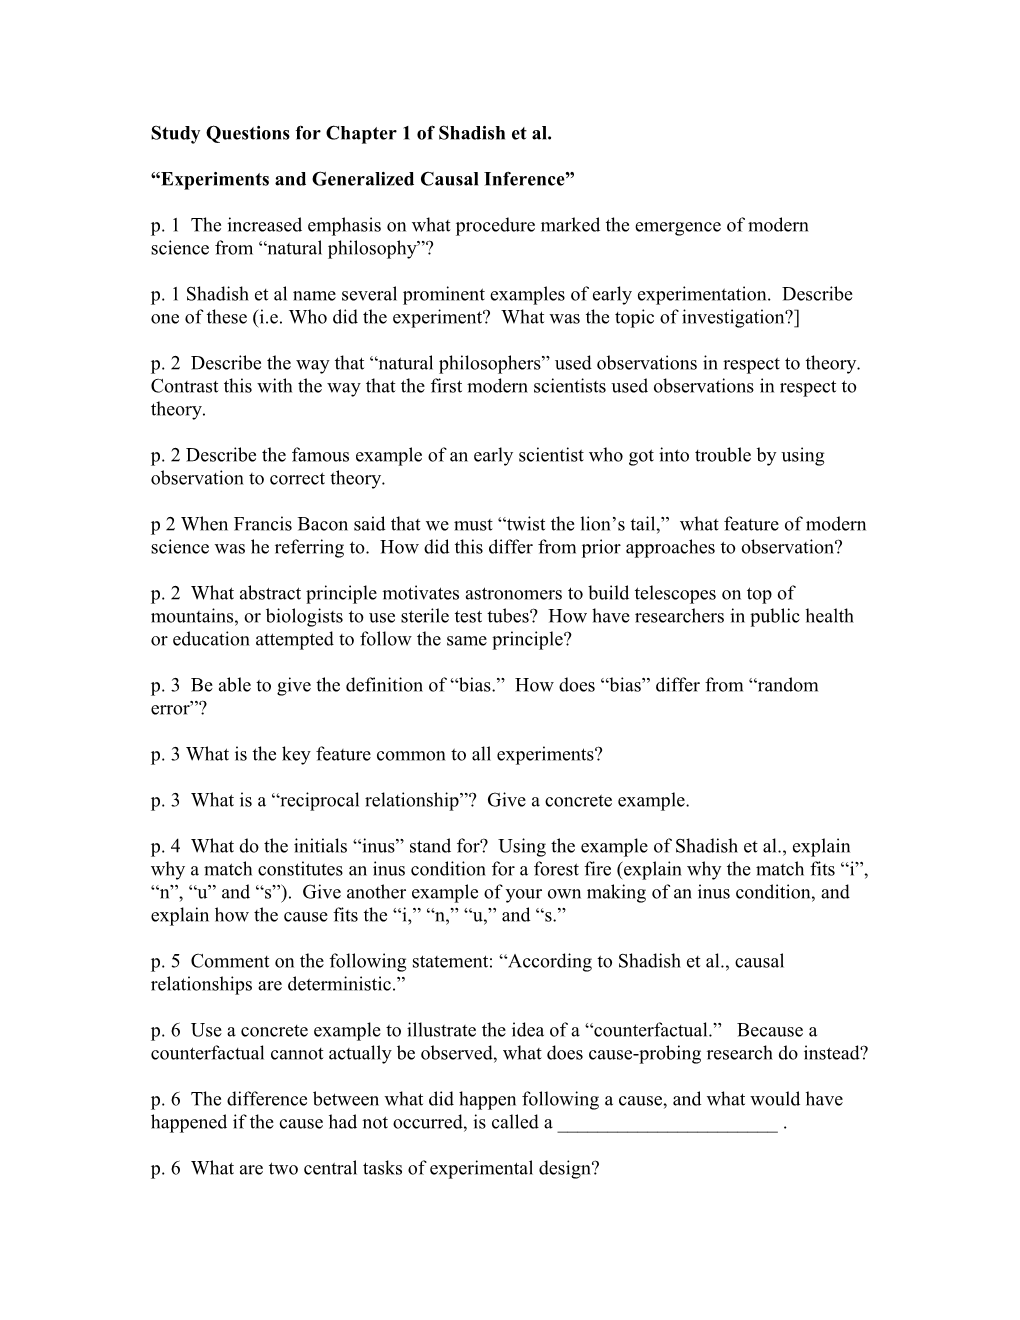 Study Questions for Chapter 1 of Shadish Et Al